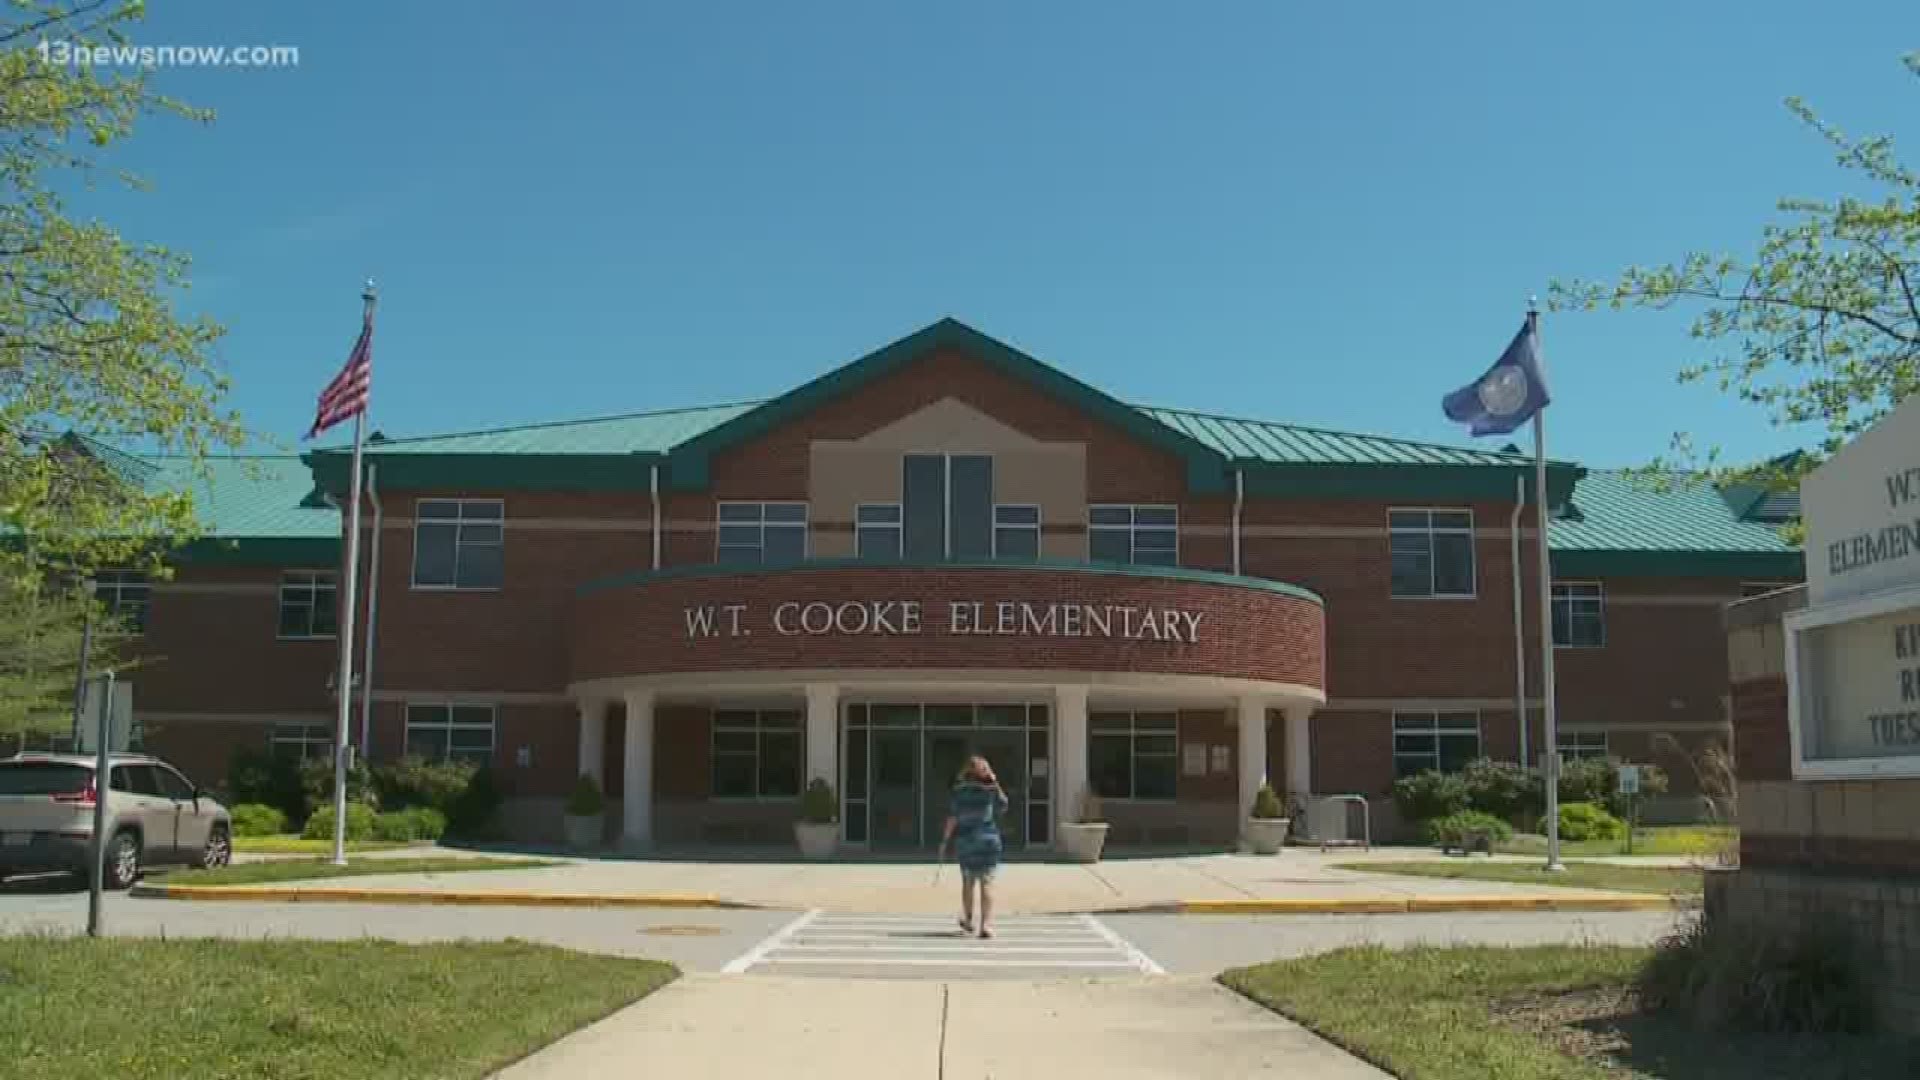 Parents and grandparents of children at W.T. Cooke Elementary and Virginia Beach Middle School are concerned about picking up their children as crowds flood the oceanfront for the Something in the Water Festival.